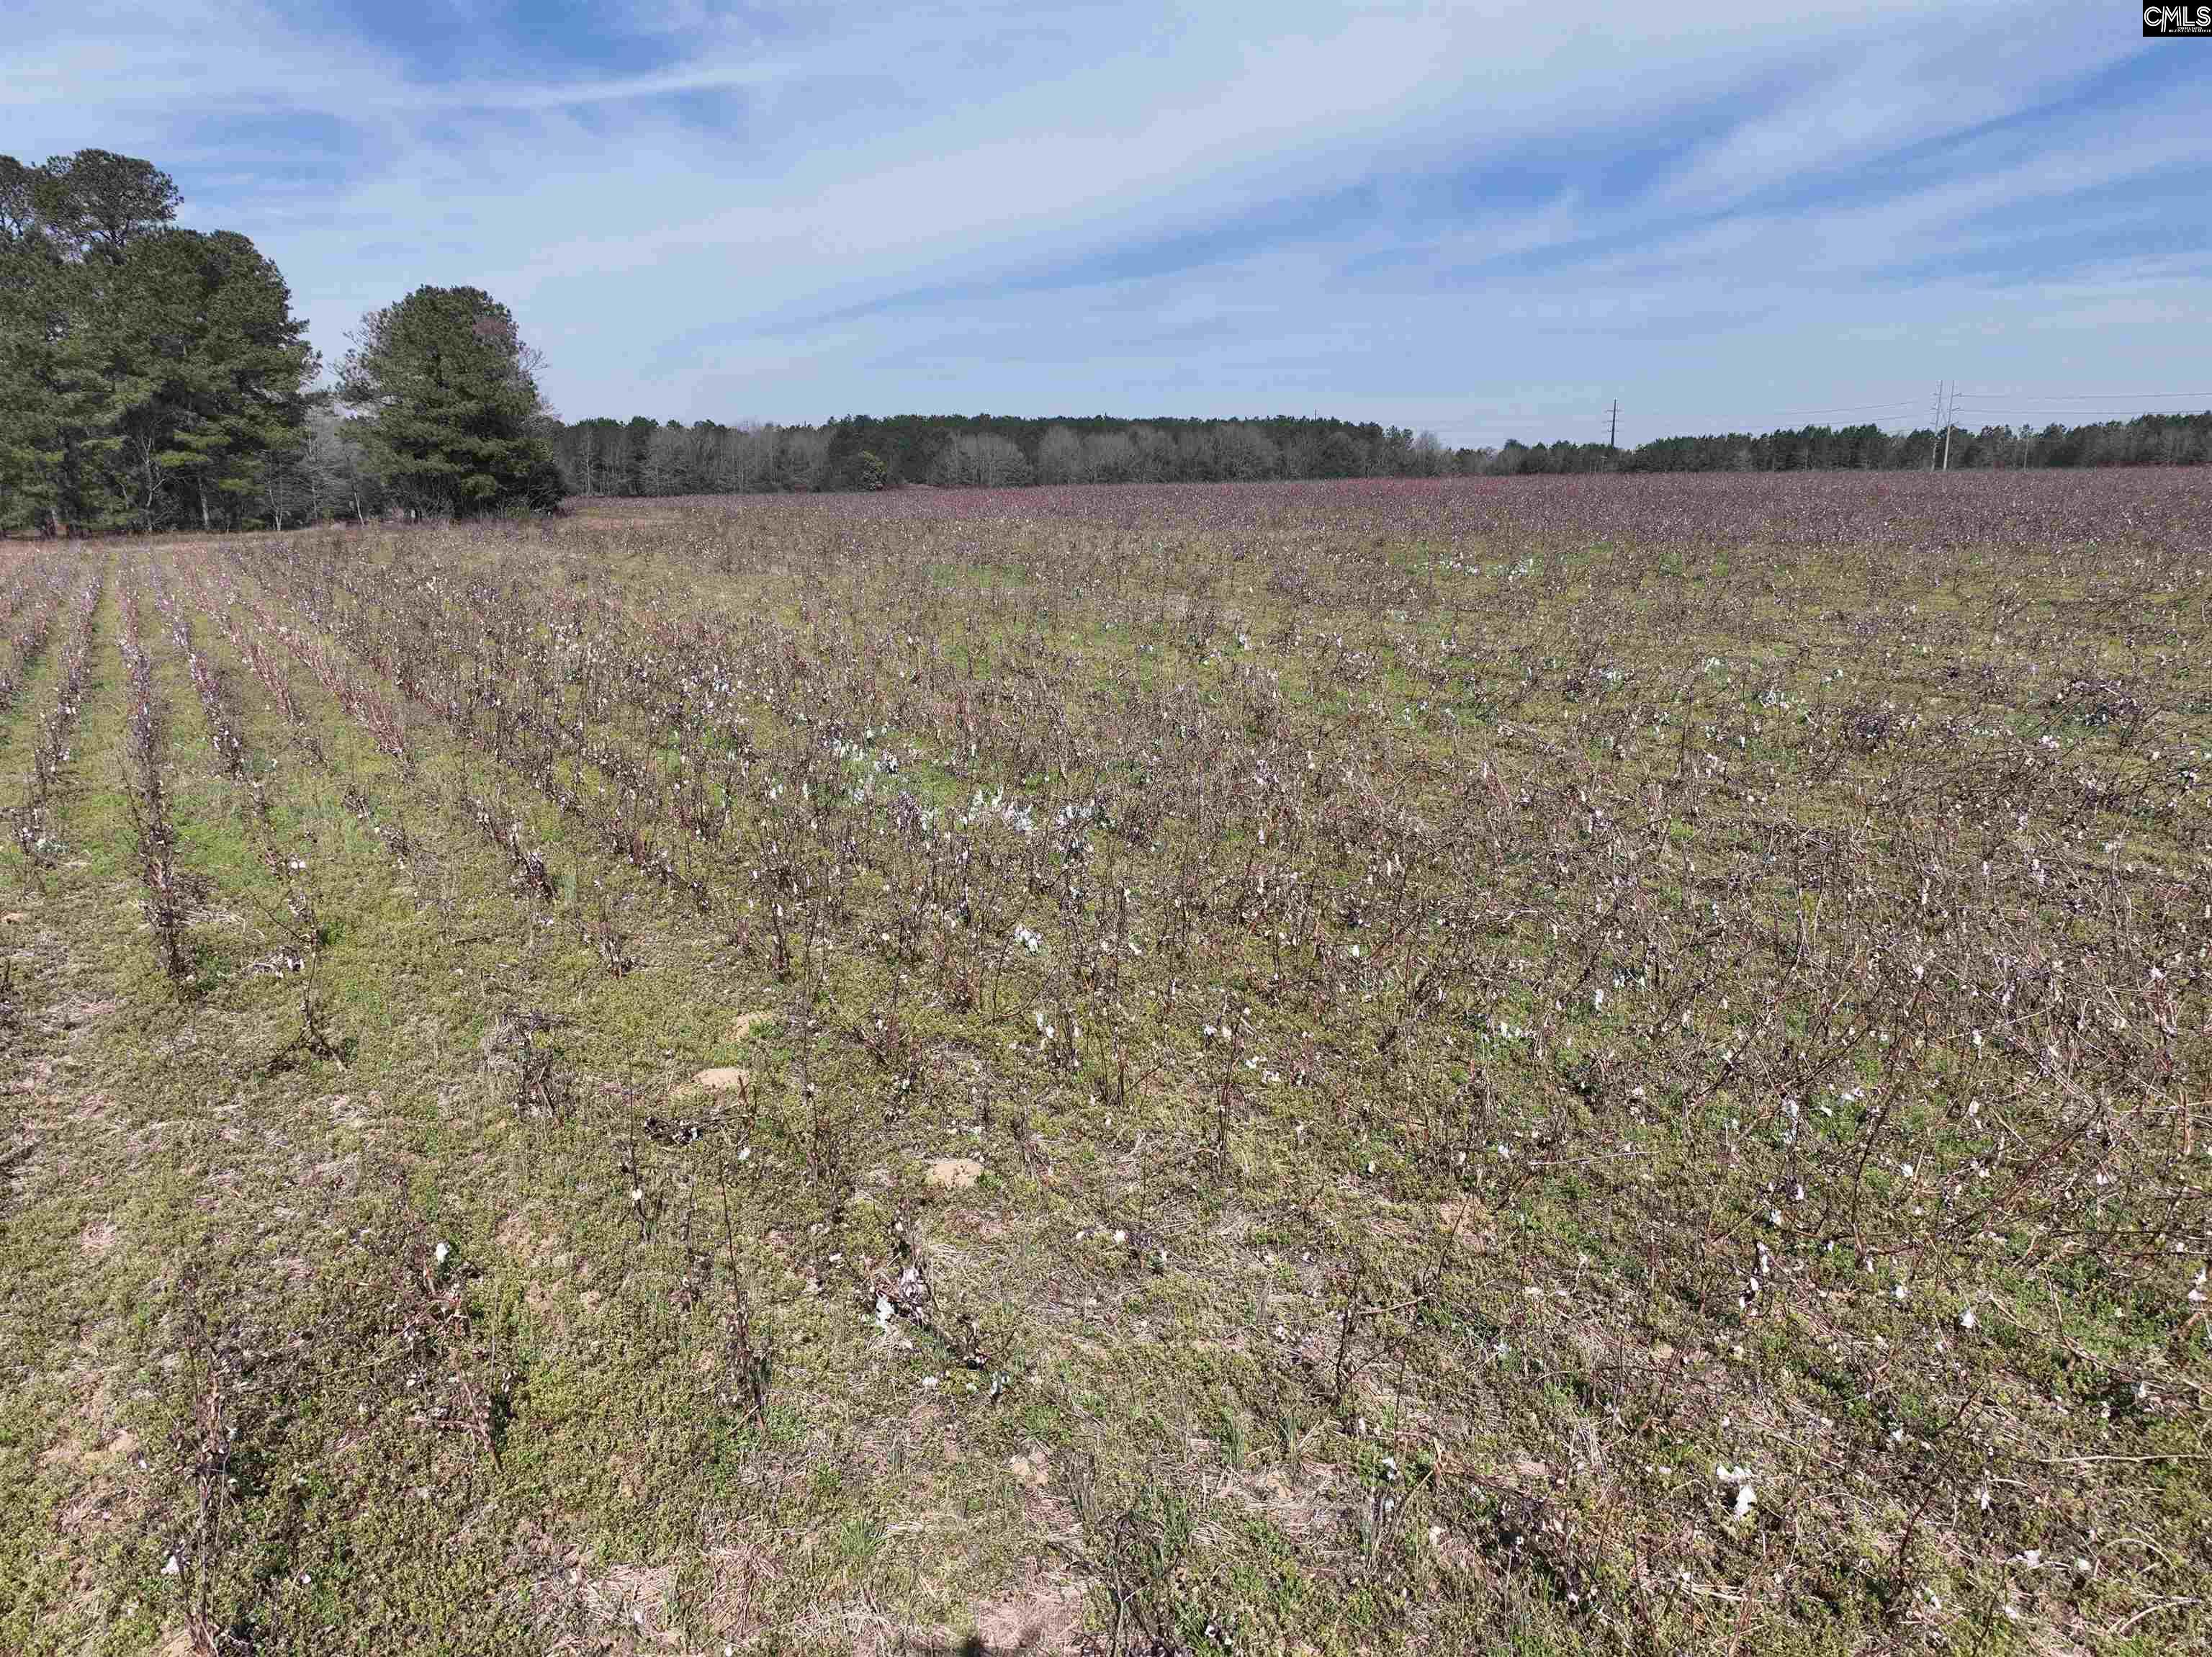  Lots For Sale - 000 Salley Road, Salley, SC - 7 